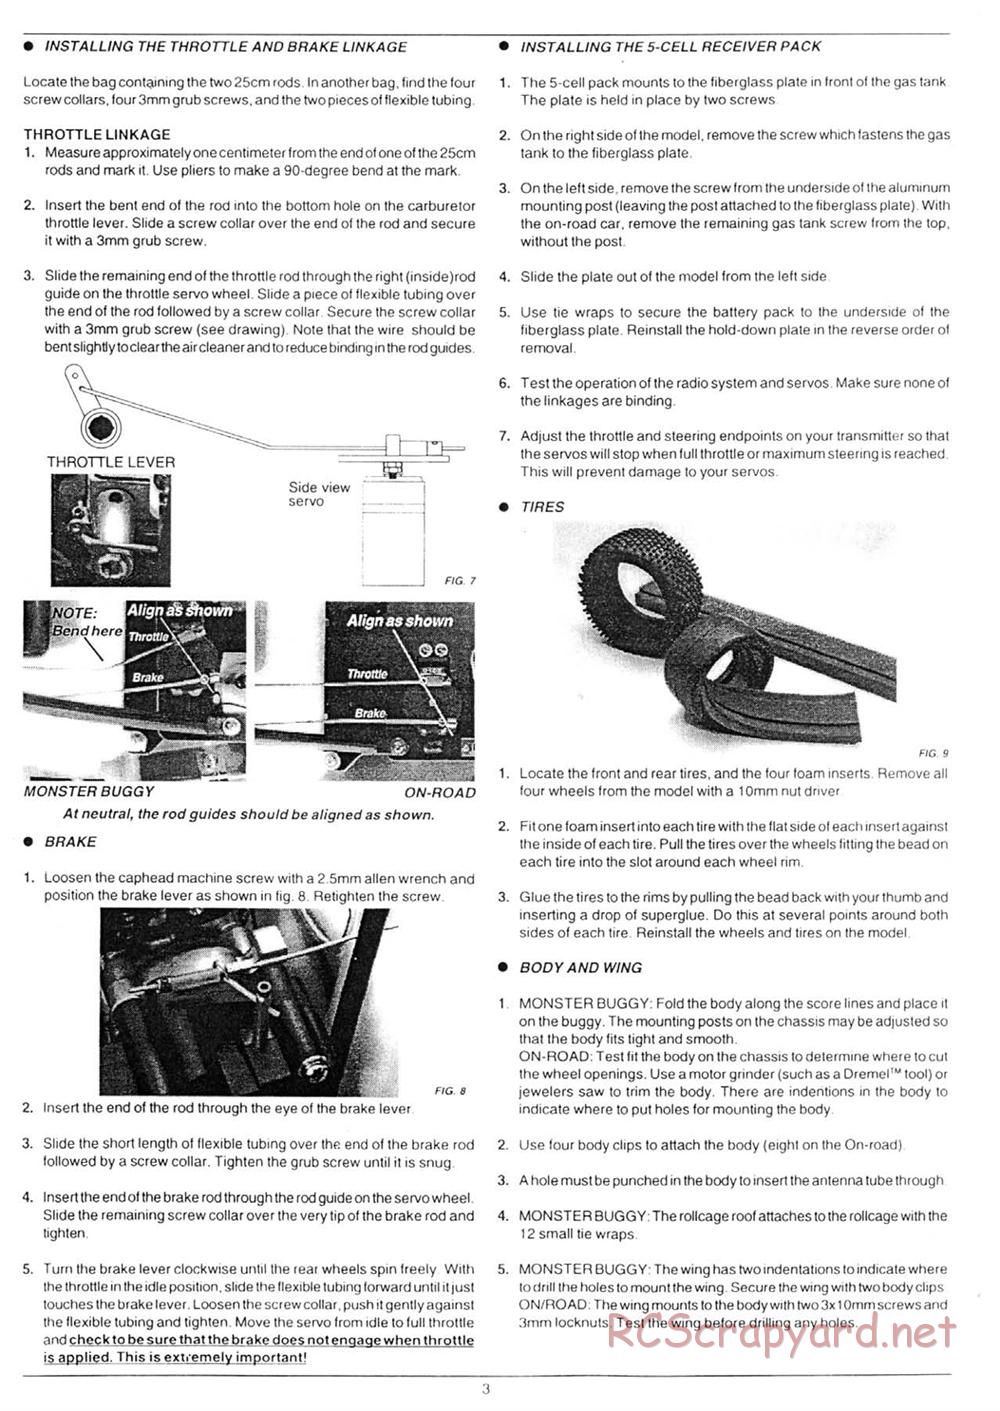 Traxxas - Monster Buggy (Gas Buggy) (1993) - Manual - Page 3